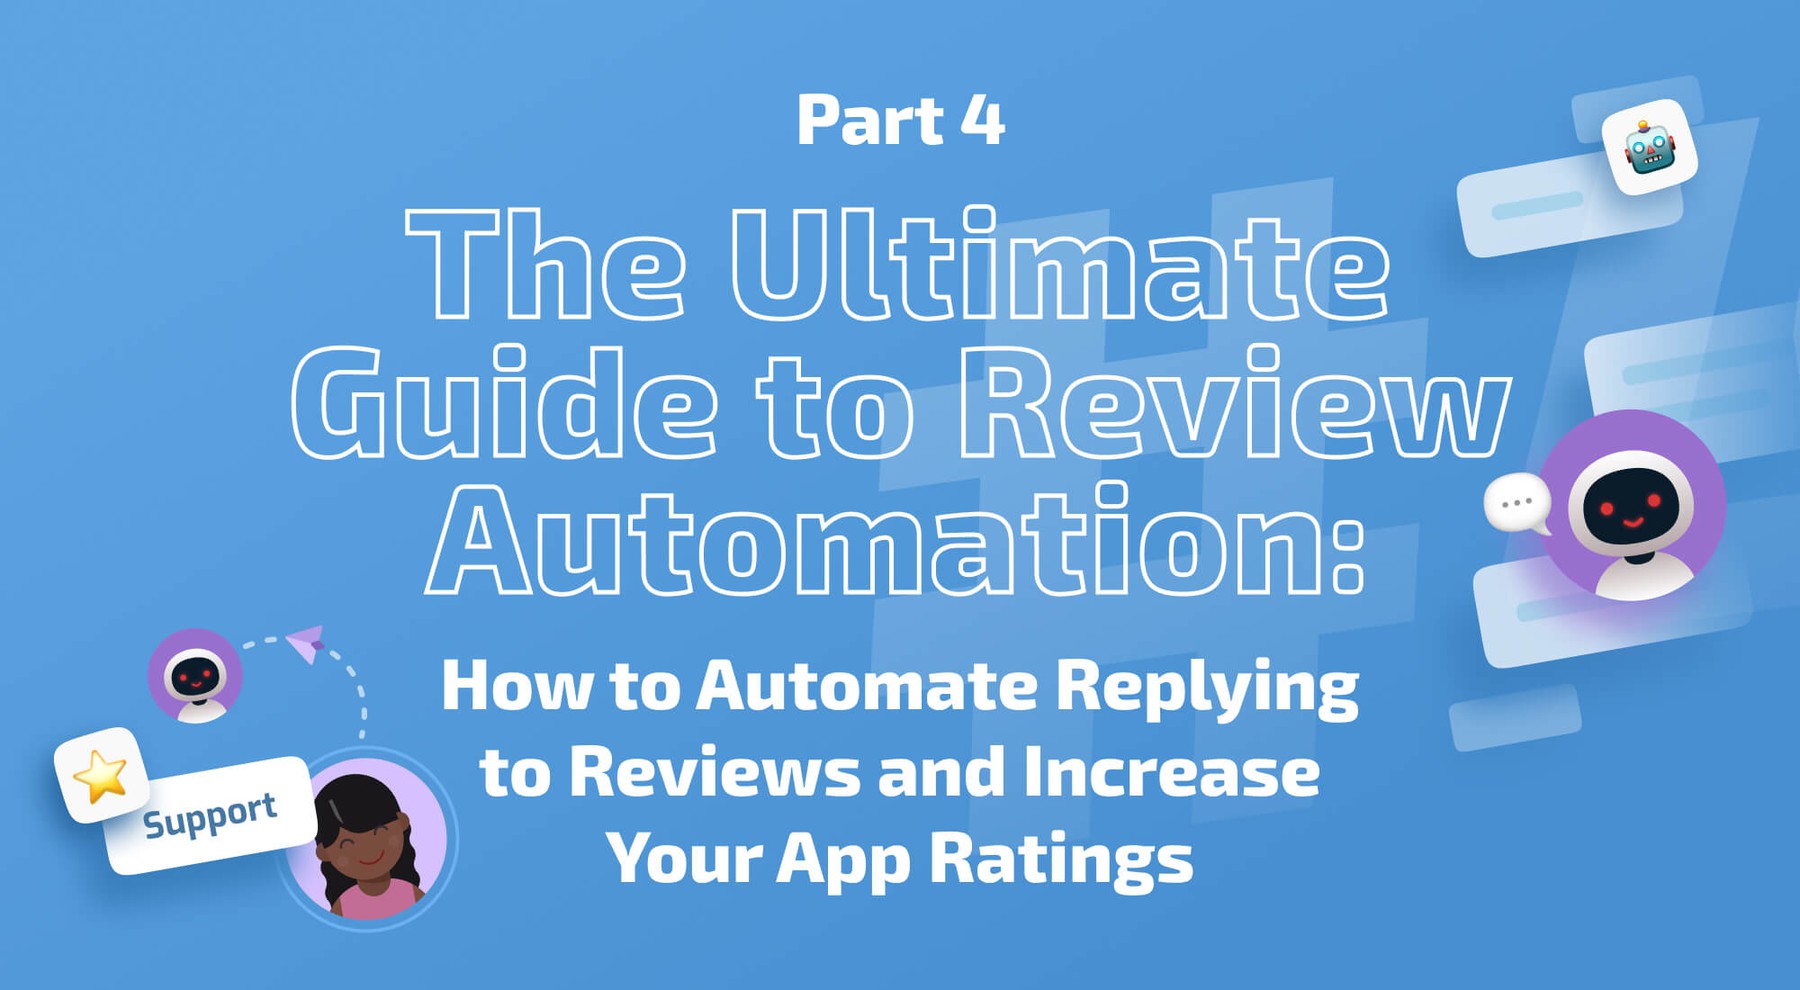 The Ultimate Guide to Review Automation: How to Automate Replying to Reviews and Increase Your App Ratings